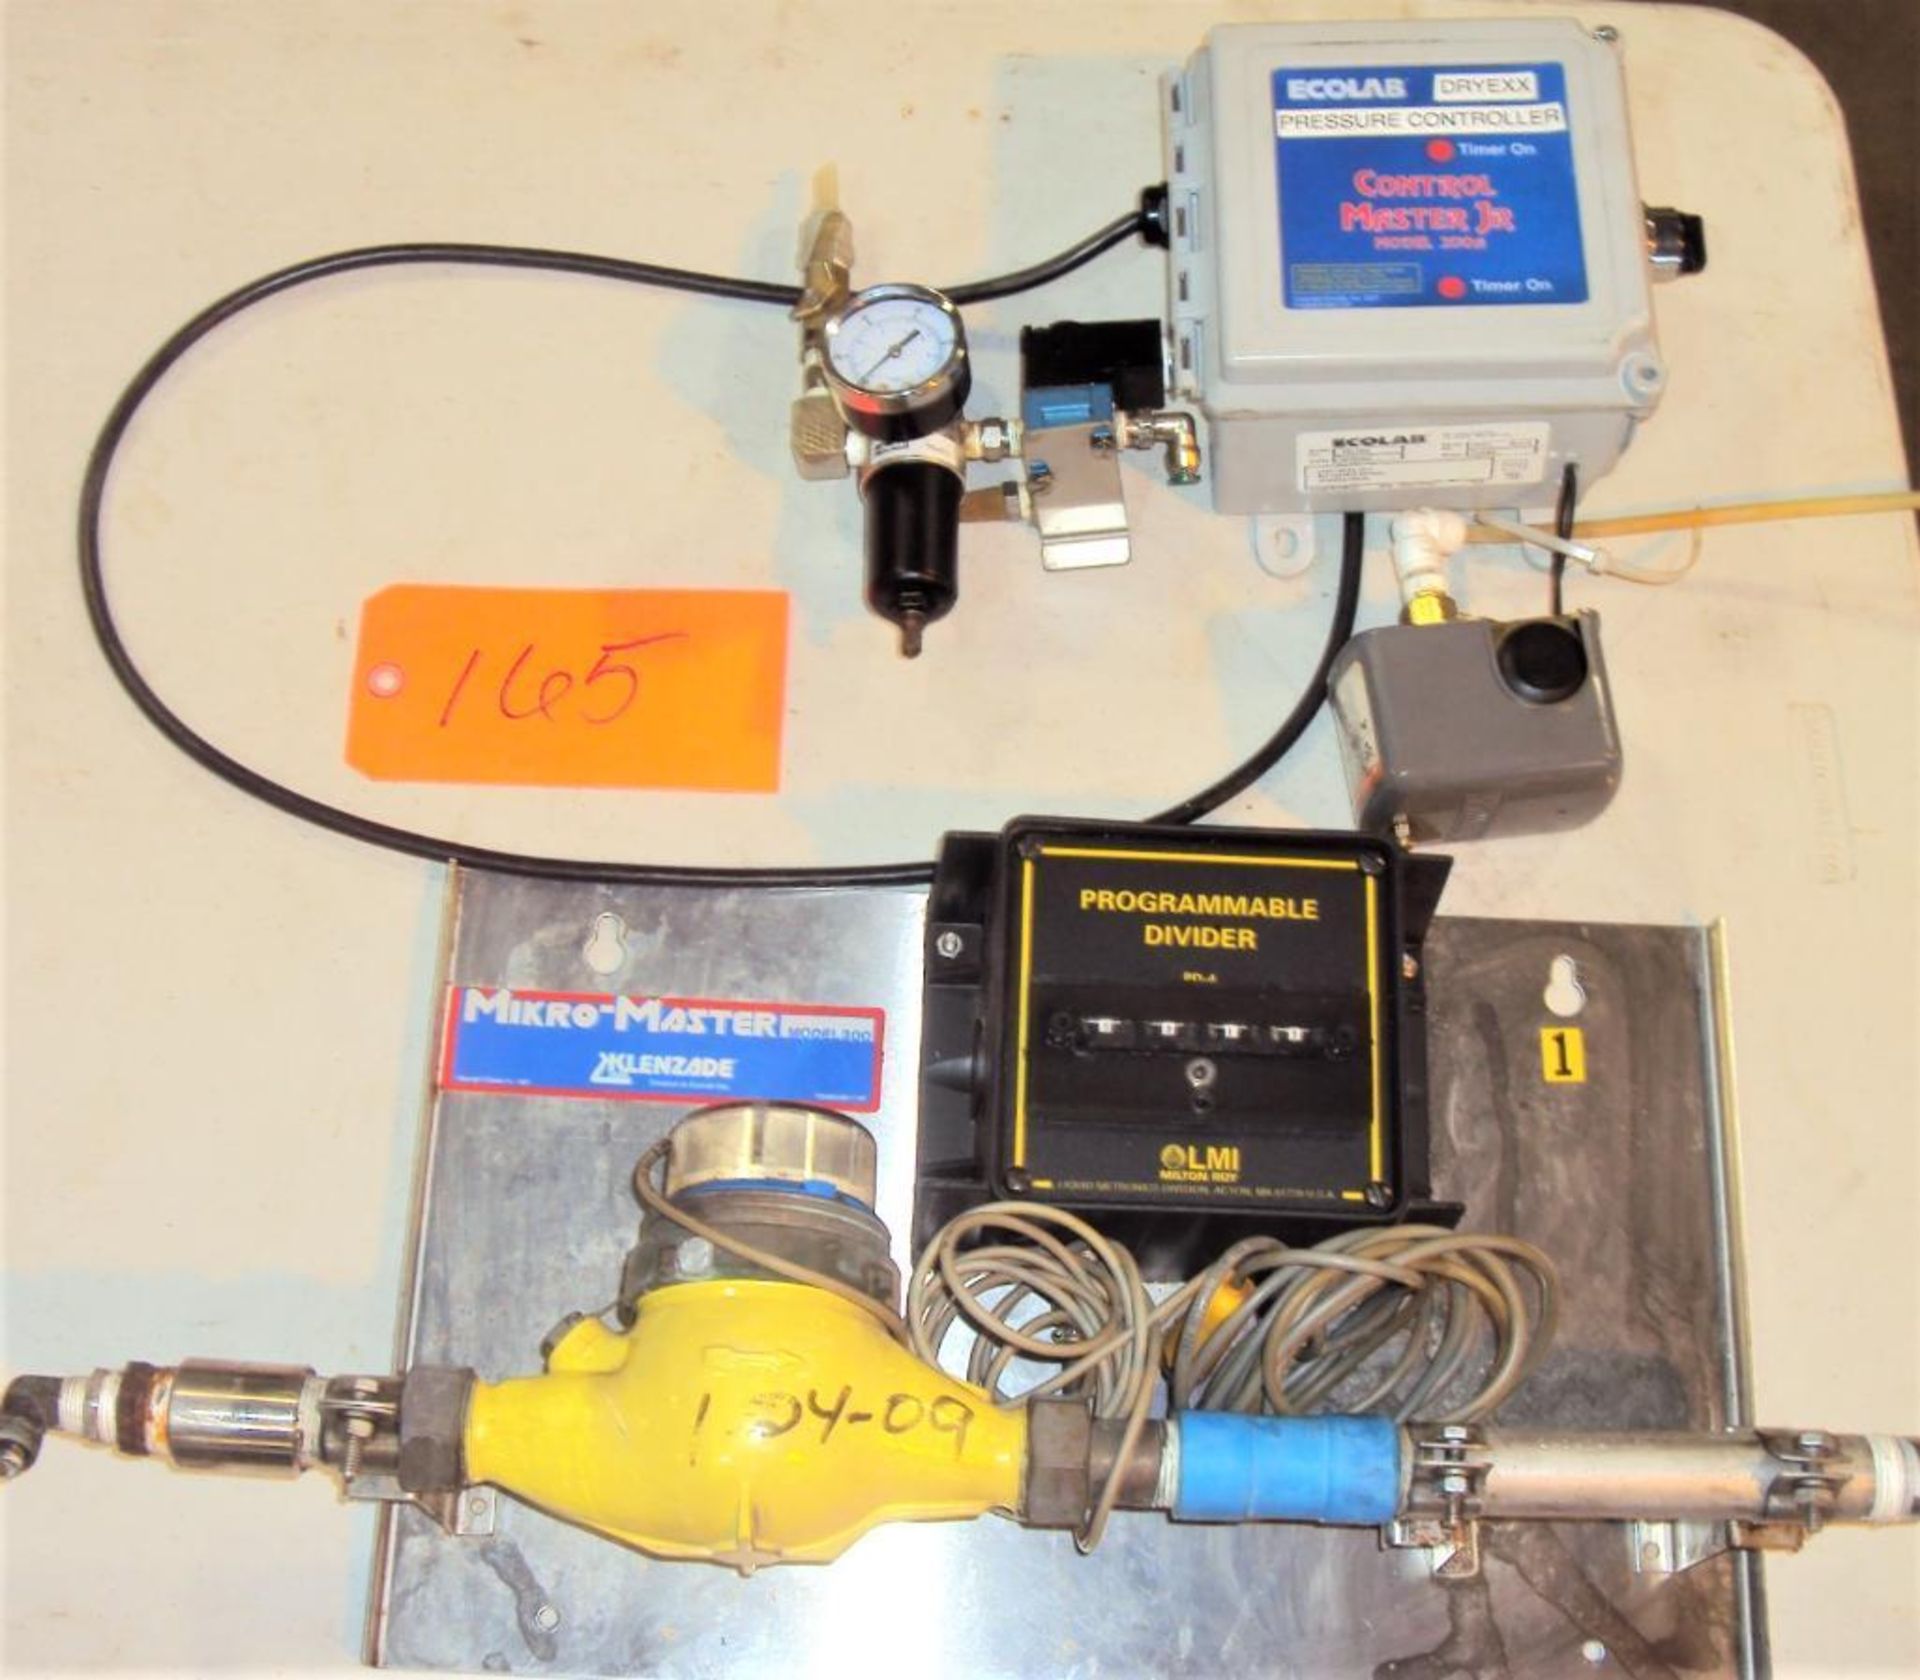 Milton Roy PD4 Programmable Divider, Ecolab CMJ200A Control Master Timer & Flow Meter Combination